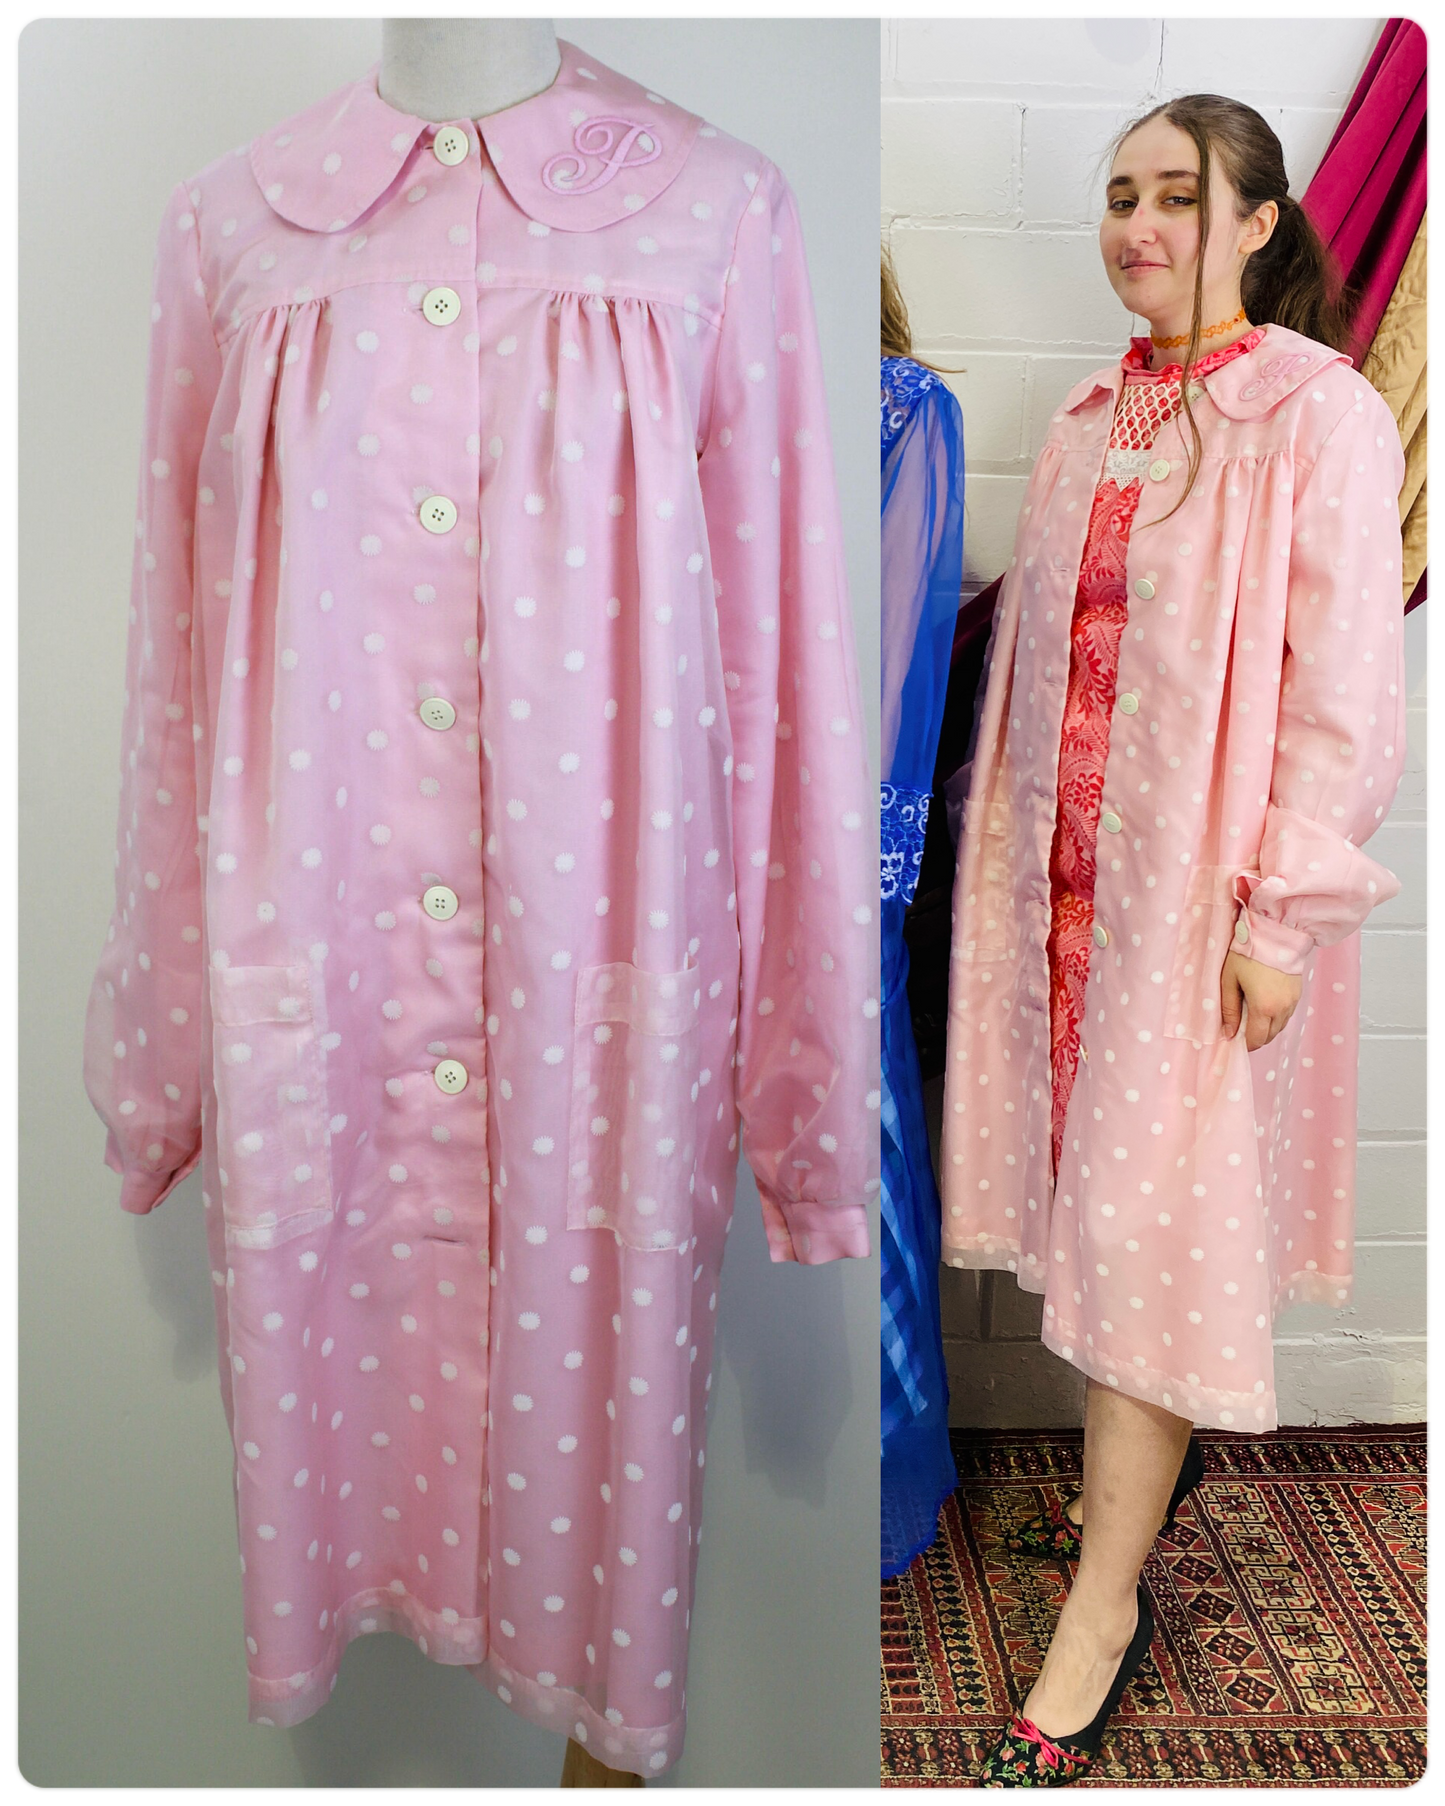 60s-Style Pink Flower Dress Jacket, Pinky's Uniform from Hairspray, Movie Costume, Embroidered P Initial